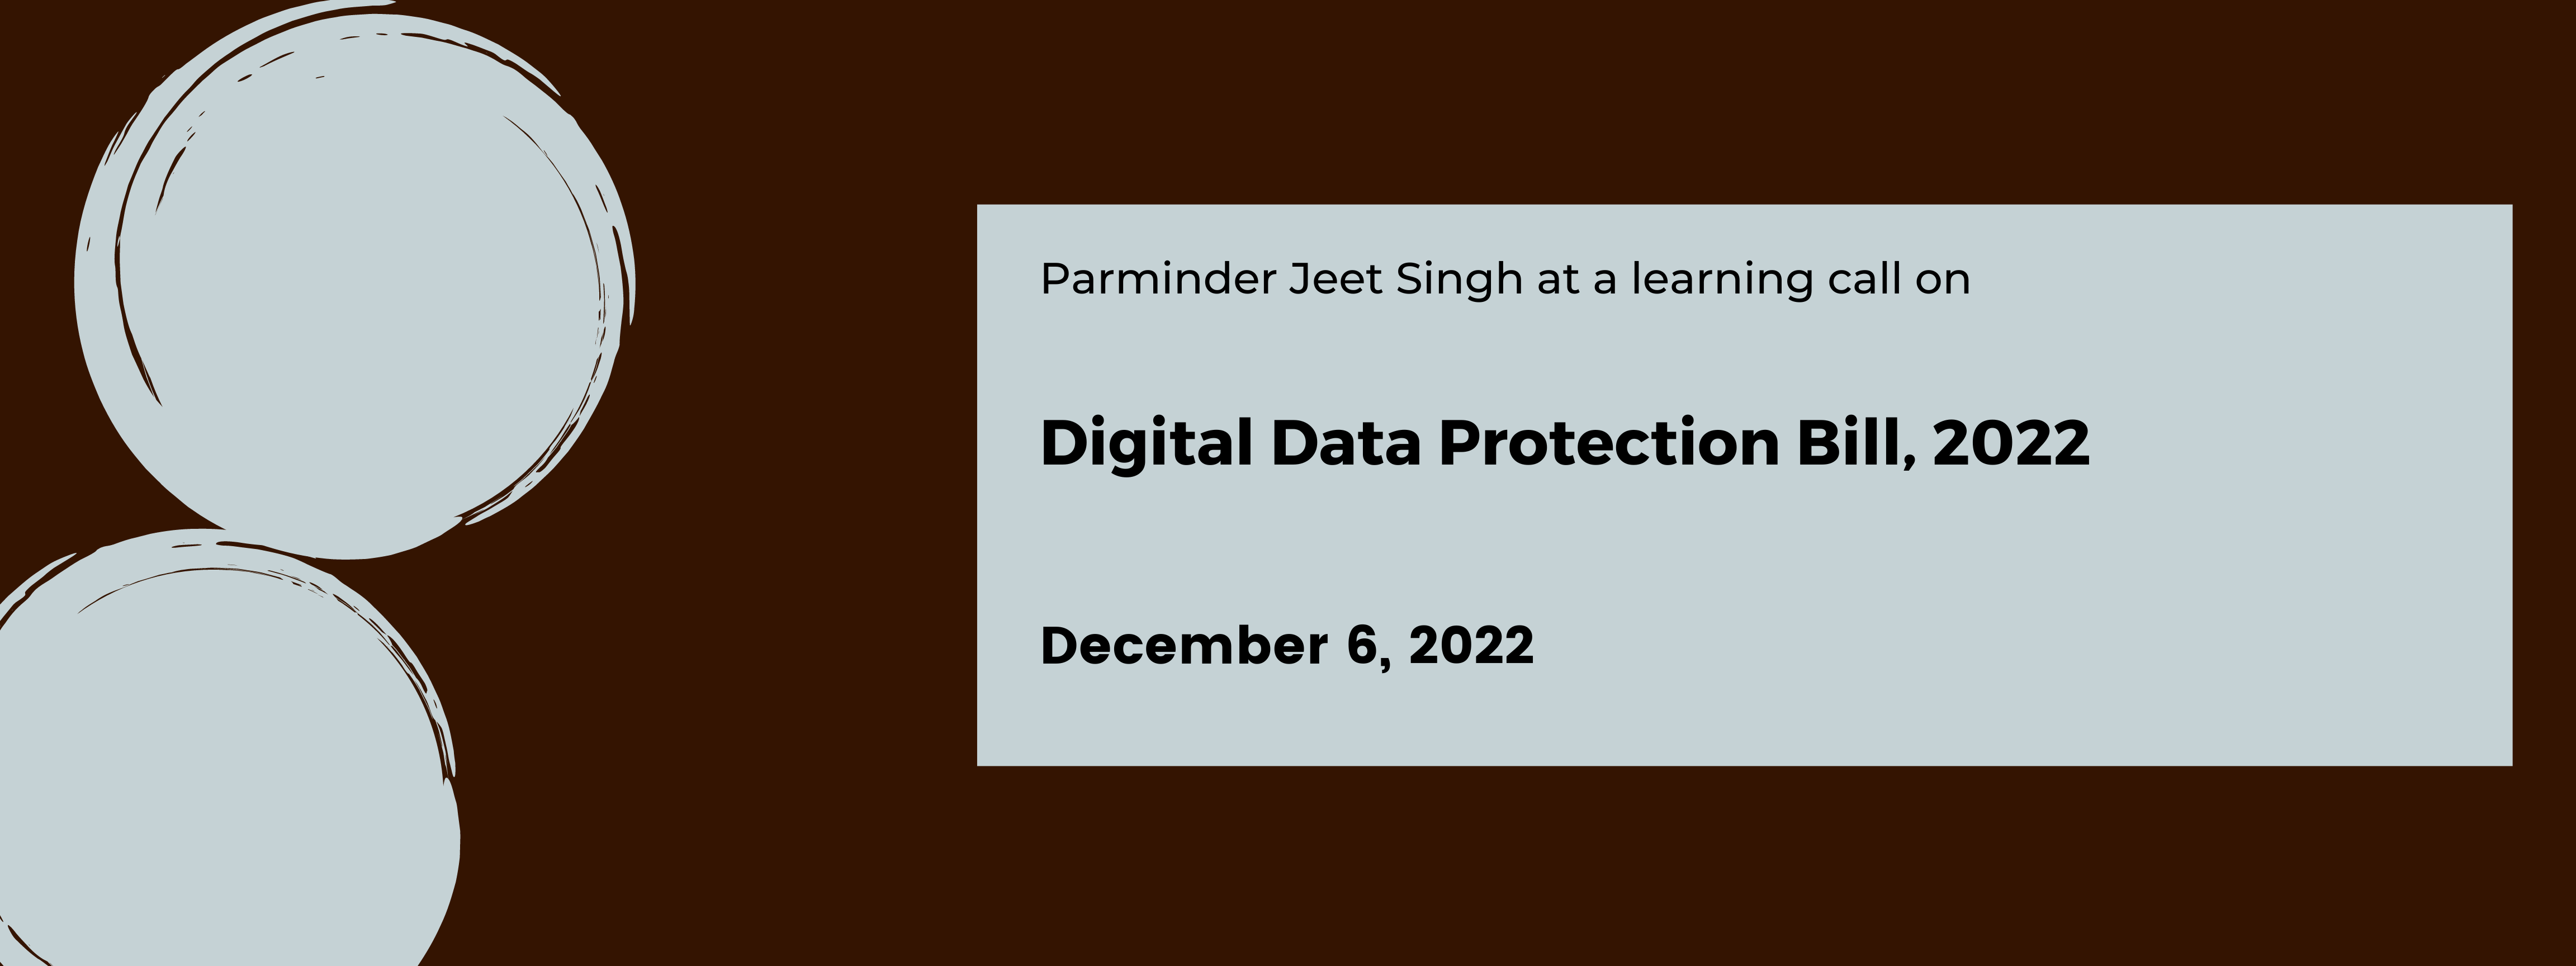 Virtual learning call on the Digital Data Protection Bill, 2022